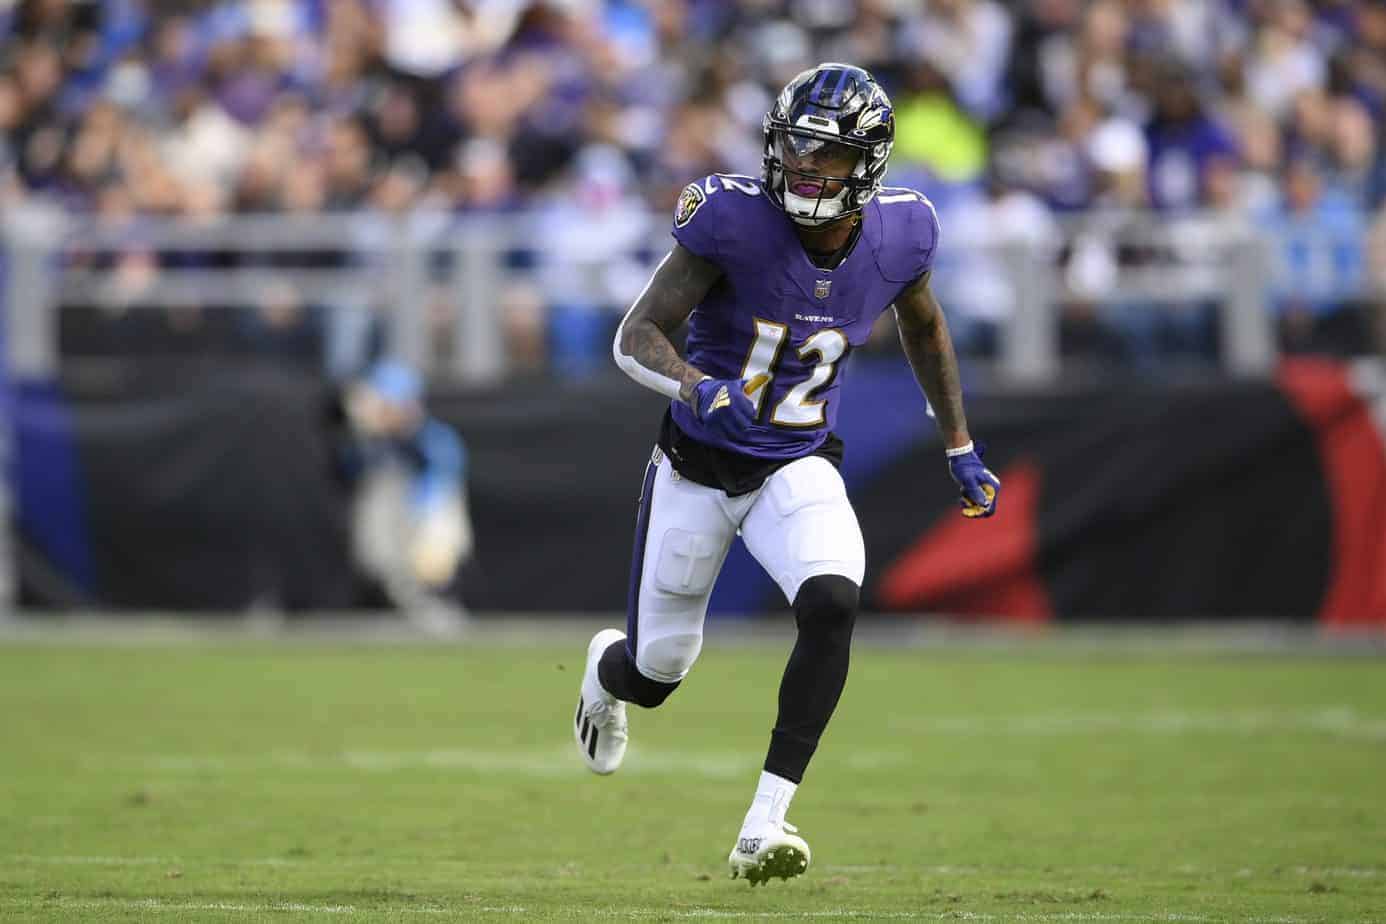 The OwnersBox NFL DFS slate has a lot of pivots for Ravens-Bengals DFS on Thursday Night Football, so let's look at DFS value plays for...